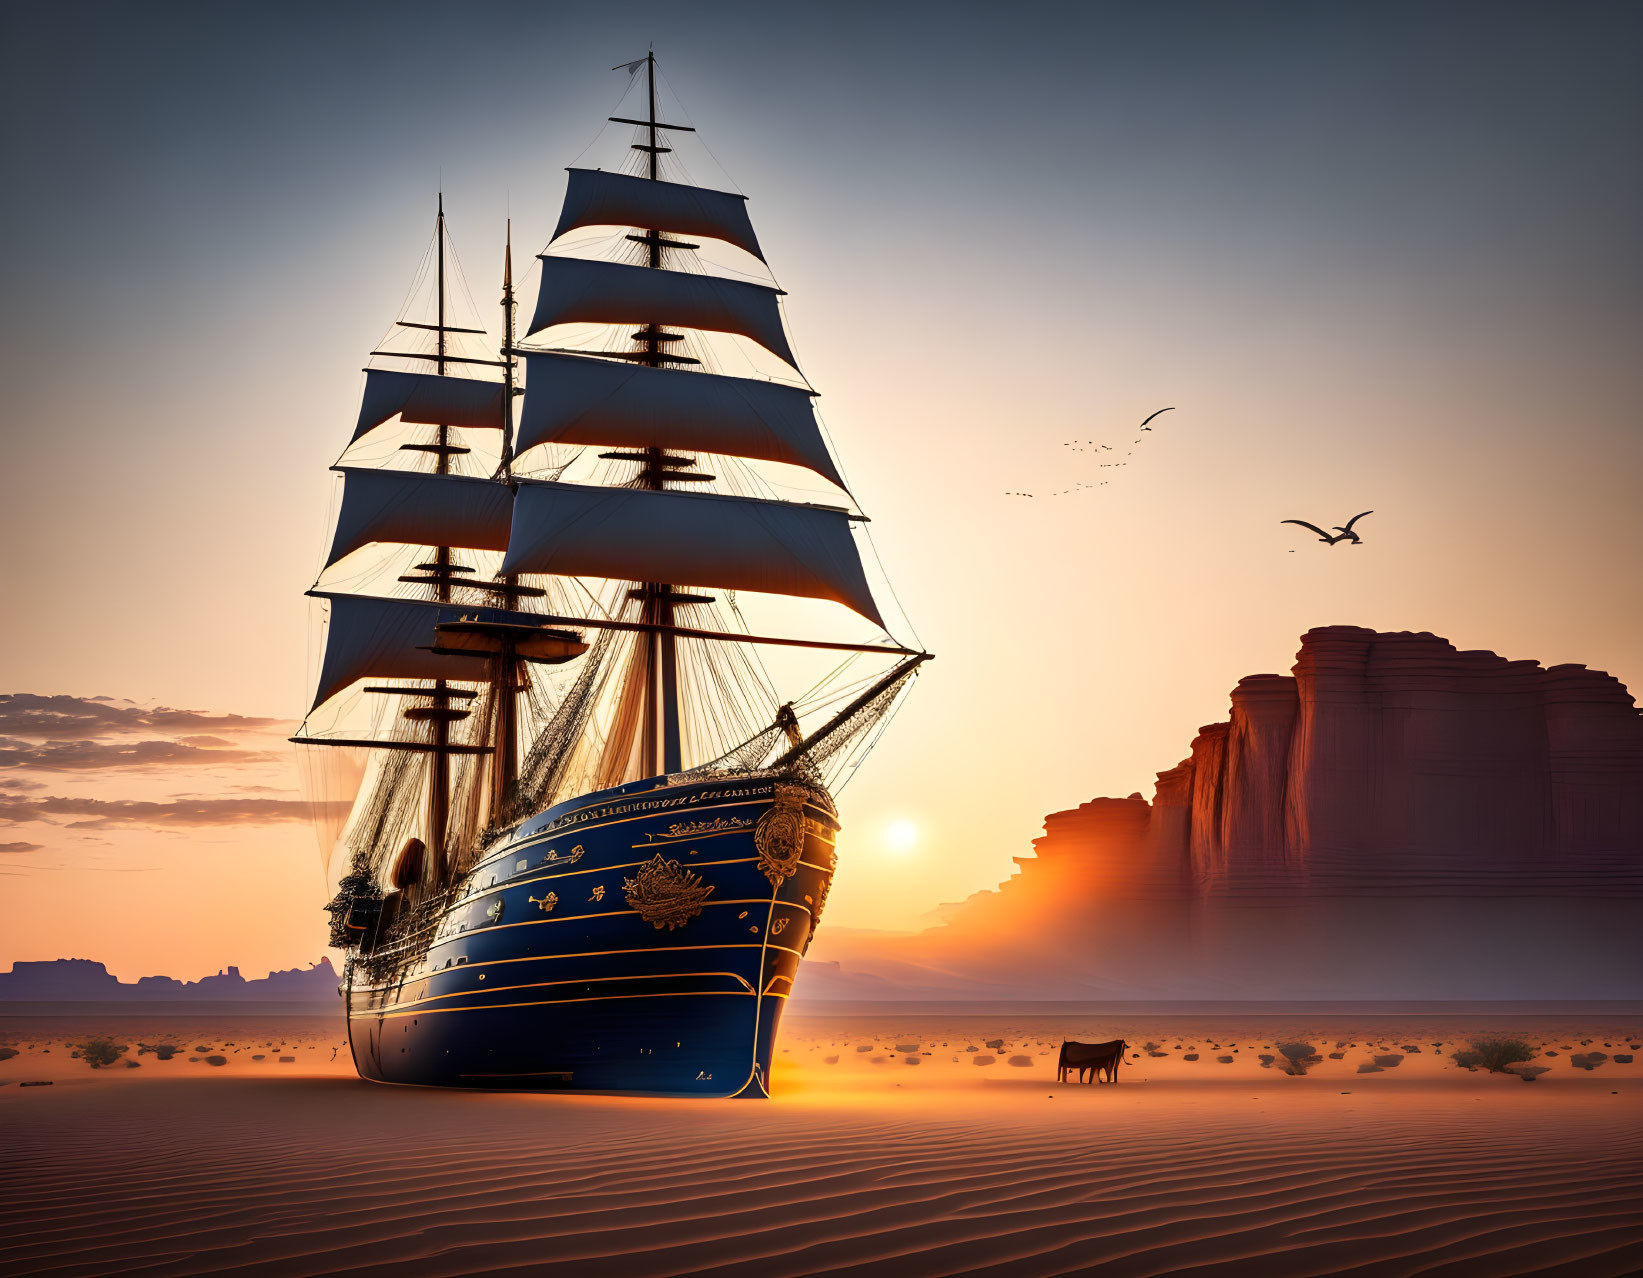 Elaborately detailed sailing ship in desert sunset with birds and horse